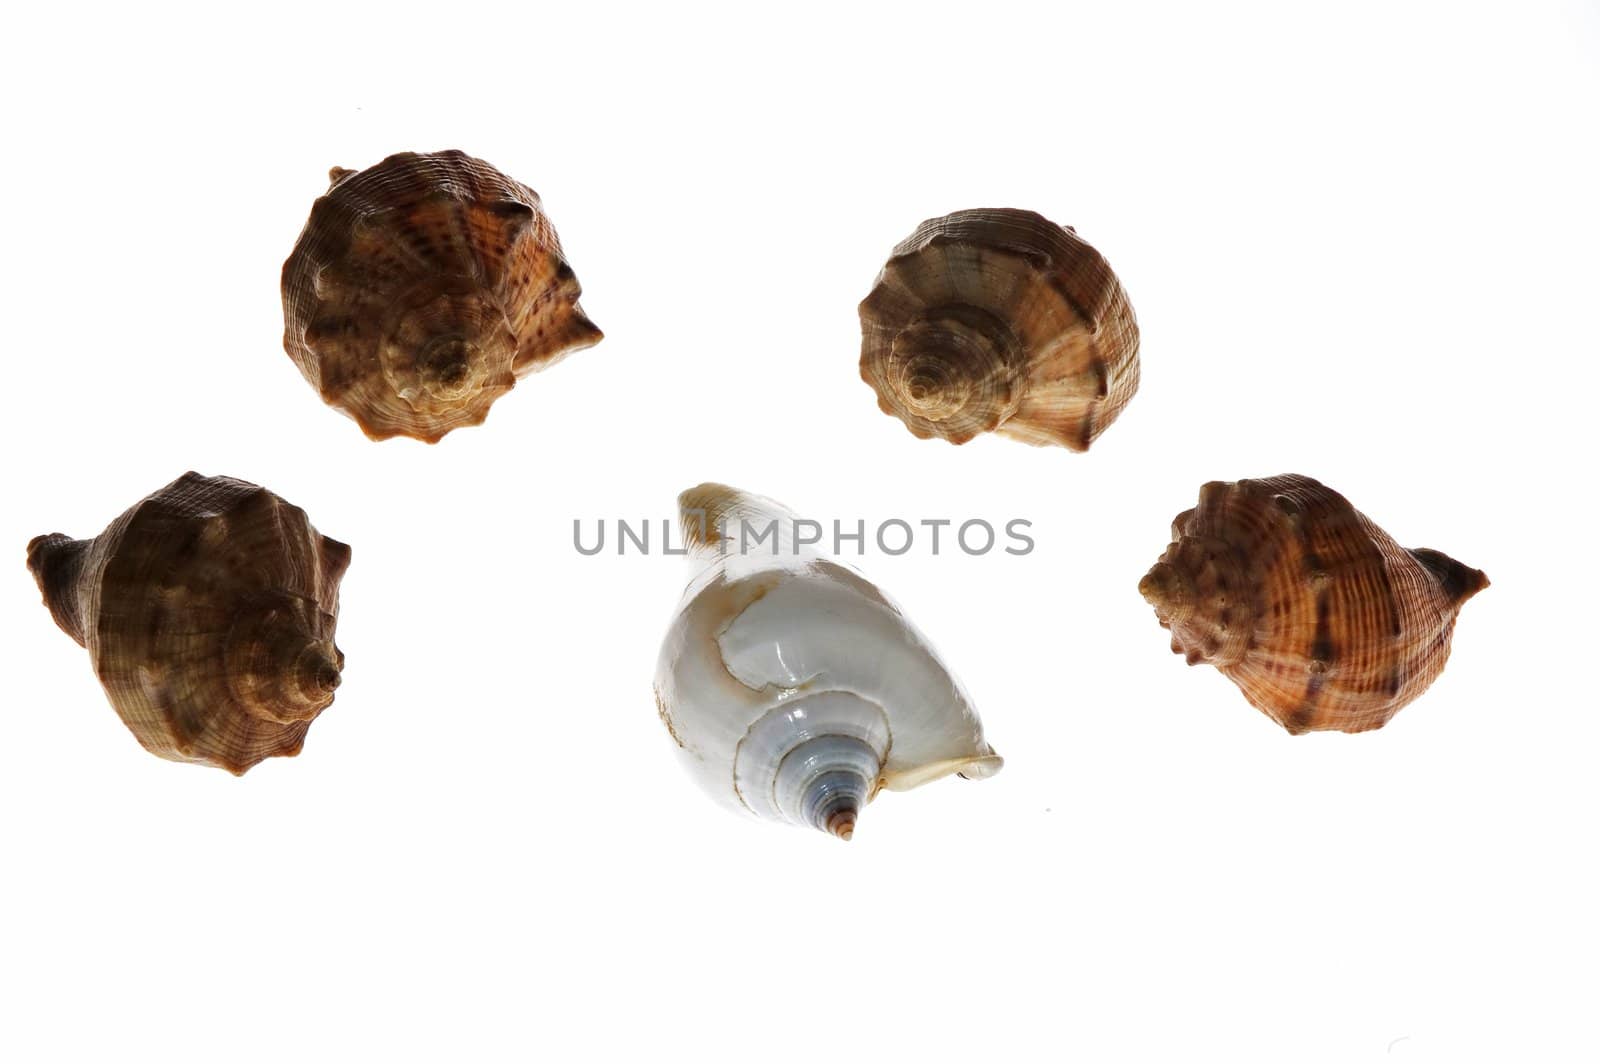 Five shells on white background